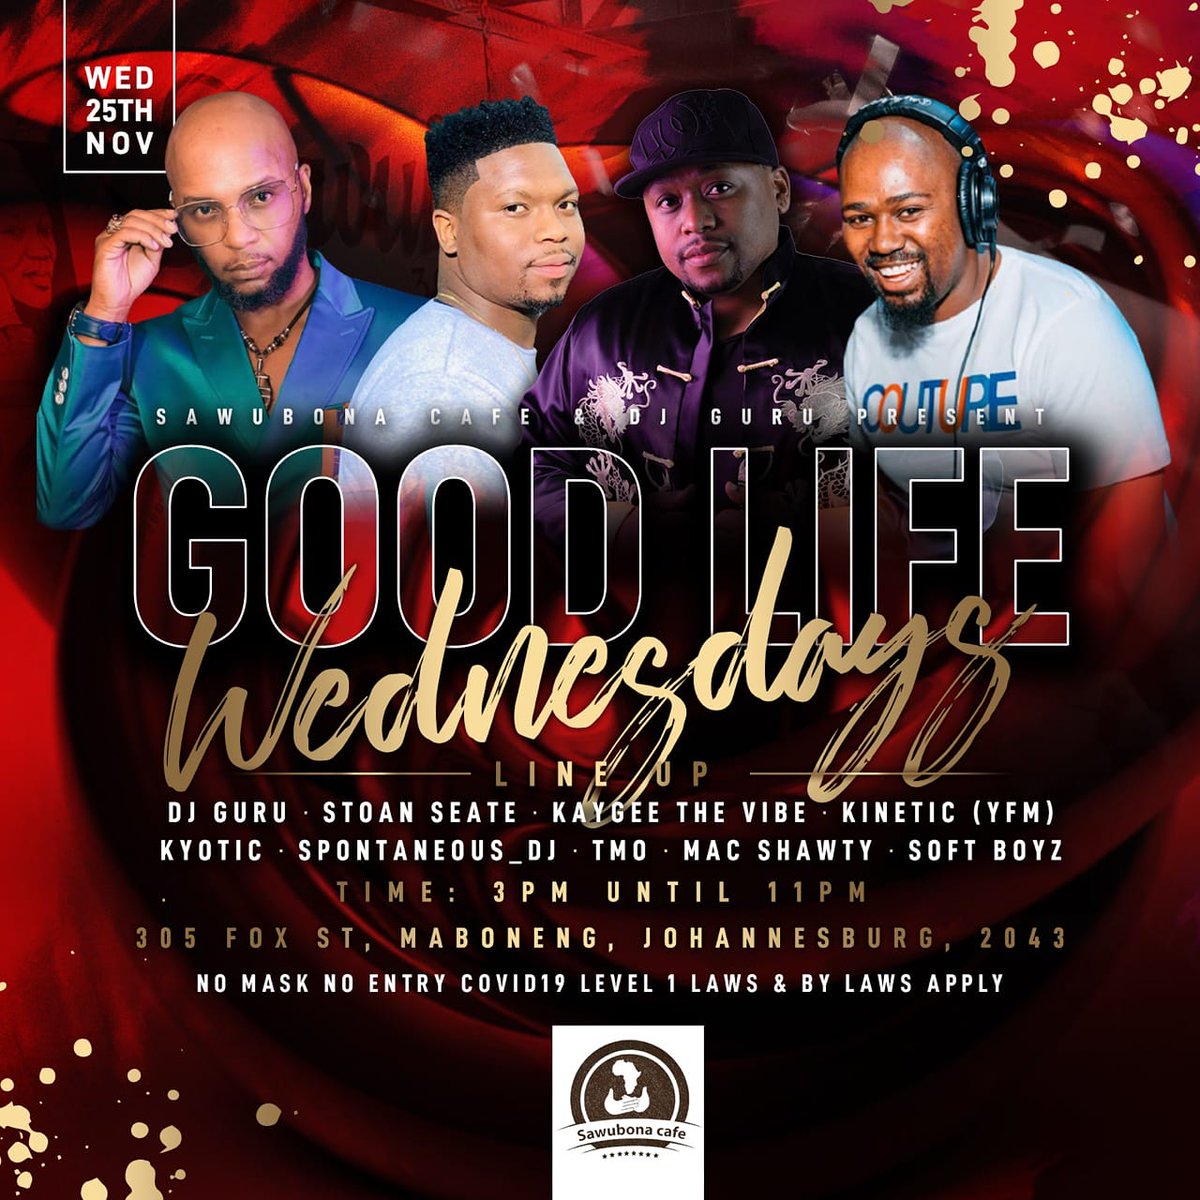 EVERY WEDNESDAY is #GoodLifeWednesdays but this week, we celebrate one of the best, @DjGuruSA birthday with some of the best on the continent! @stoanito @kaygeethevibe @kyotic @Spontaneous_Dj @mac_shawtydj @Yfm 's Dj Kinetic and more!